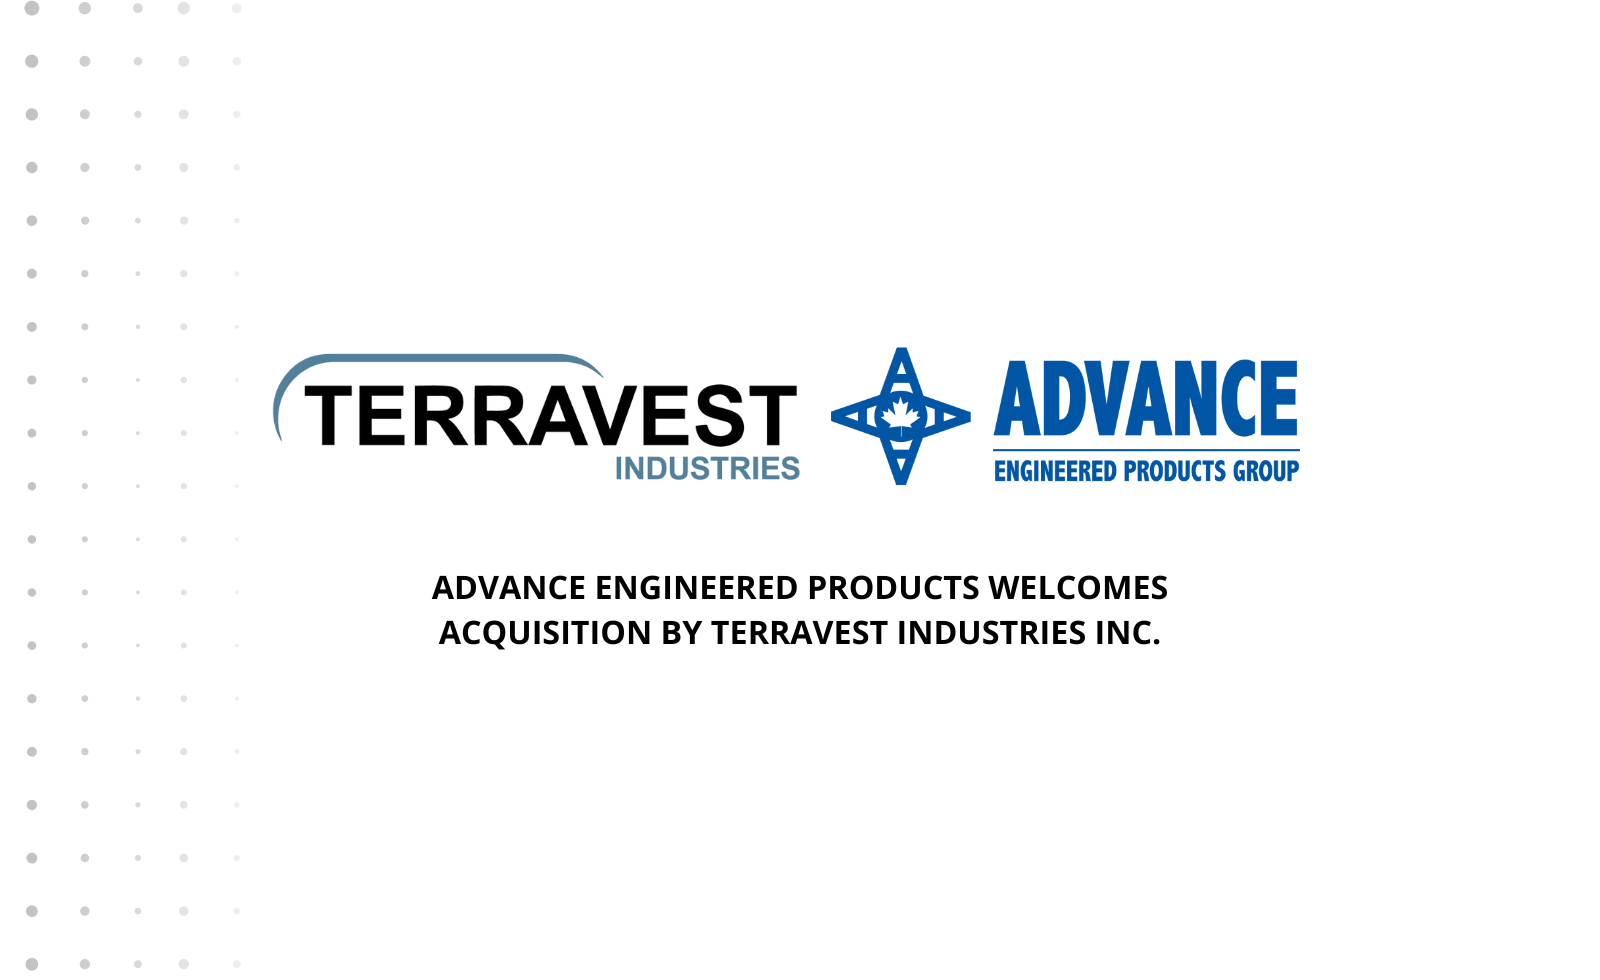 ADVANCE-ENGINEERED-PRODUCTS-WELCOMES-ACQUISITION-BY-TERRAVEST-INDUSTRIES-INC